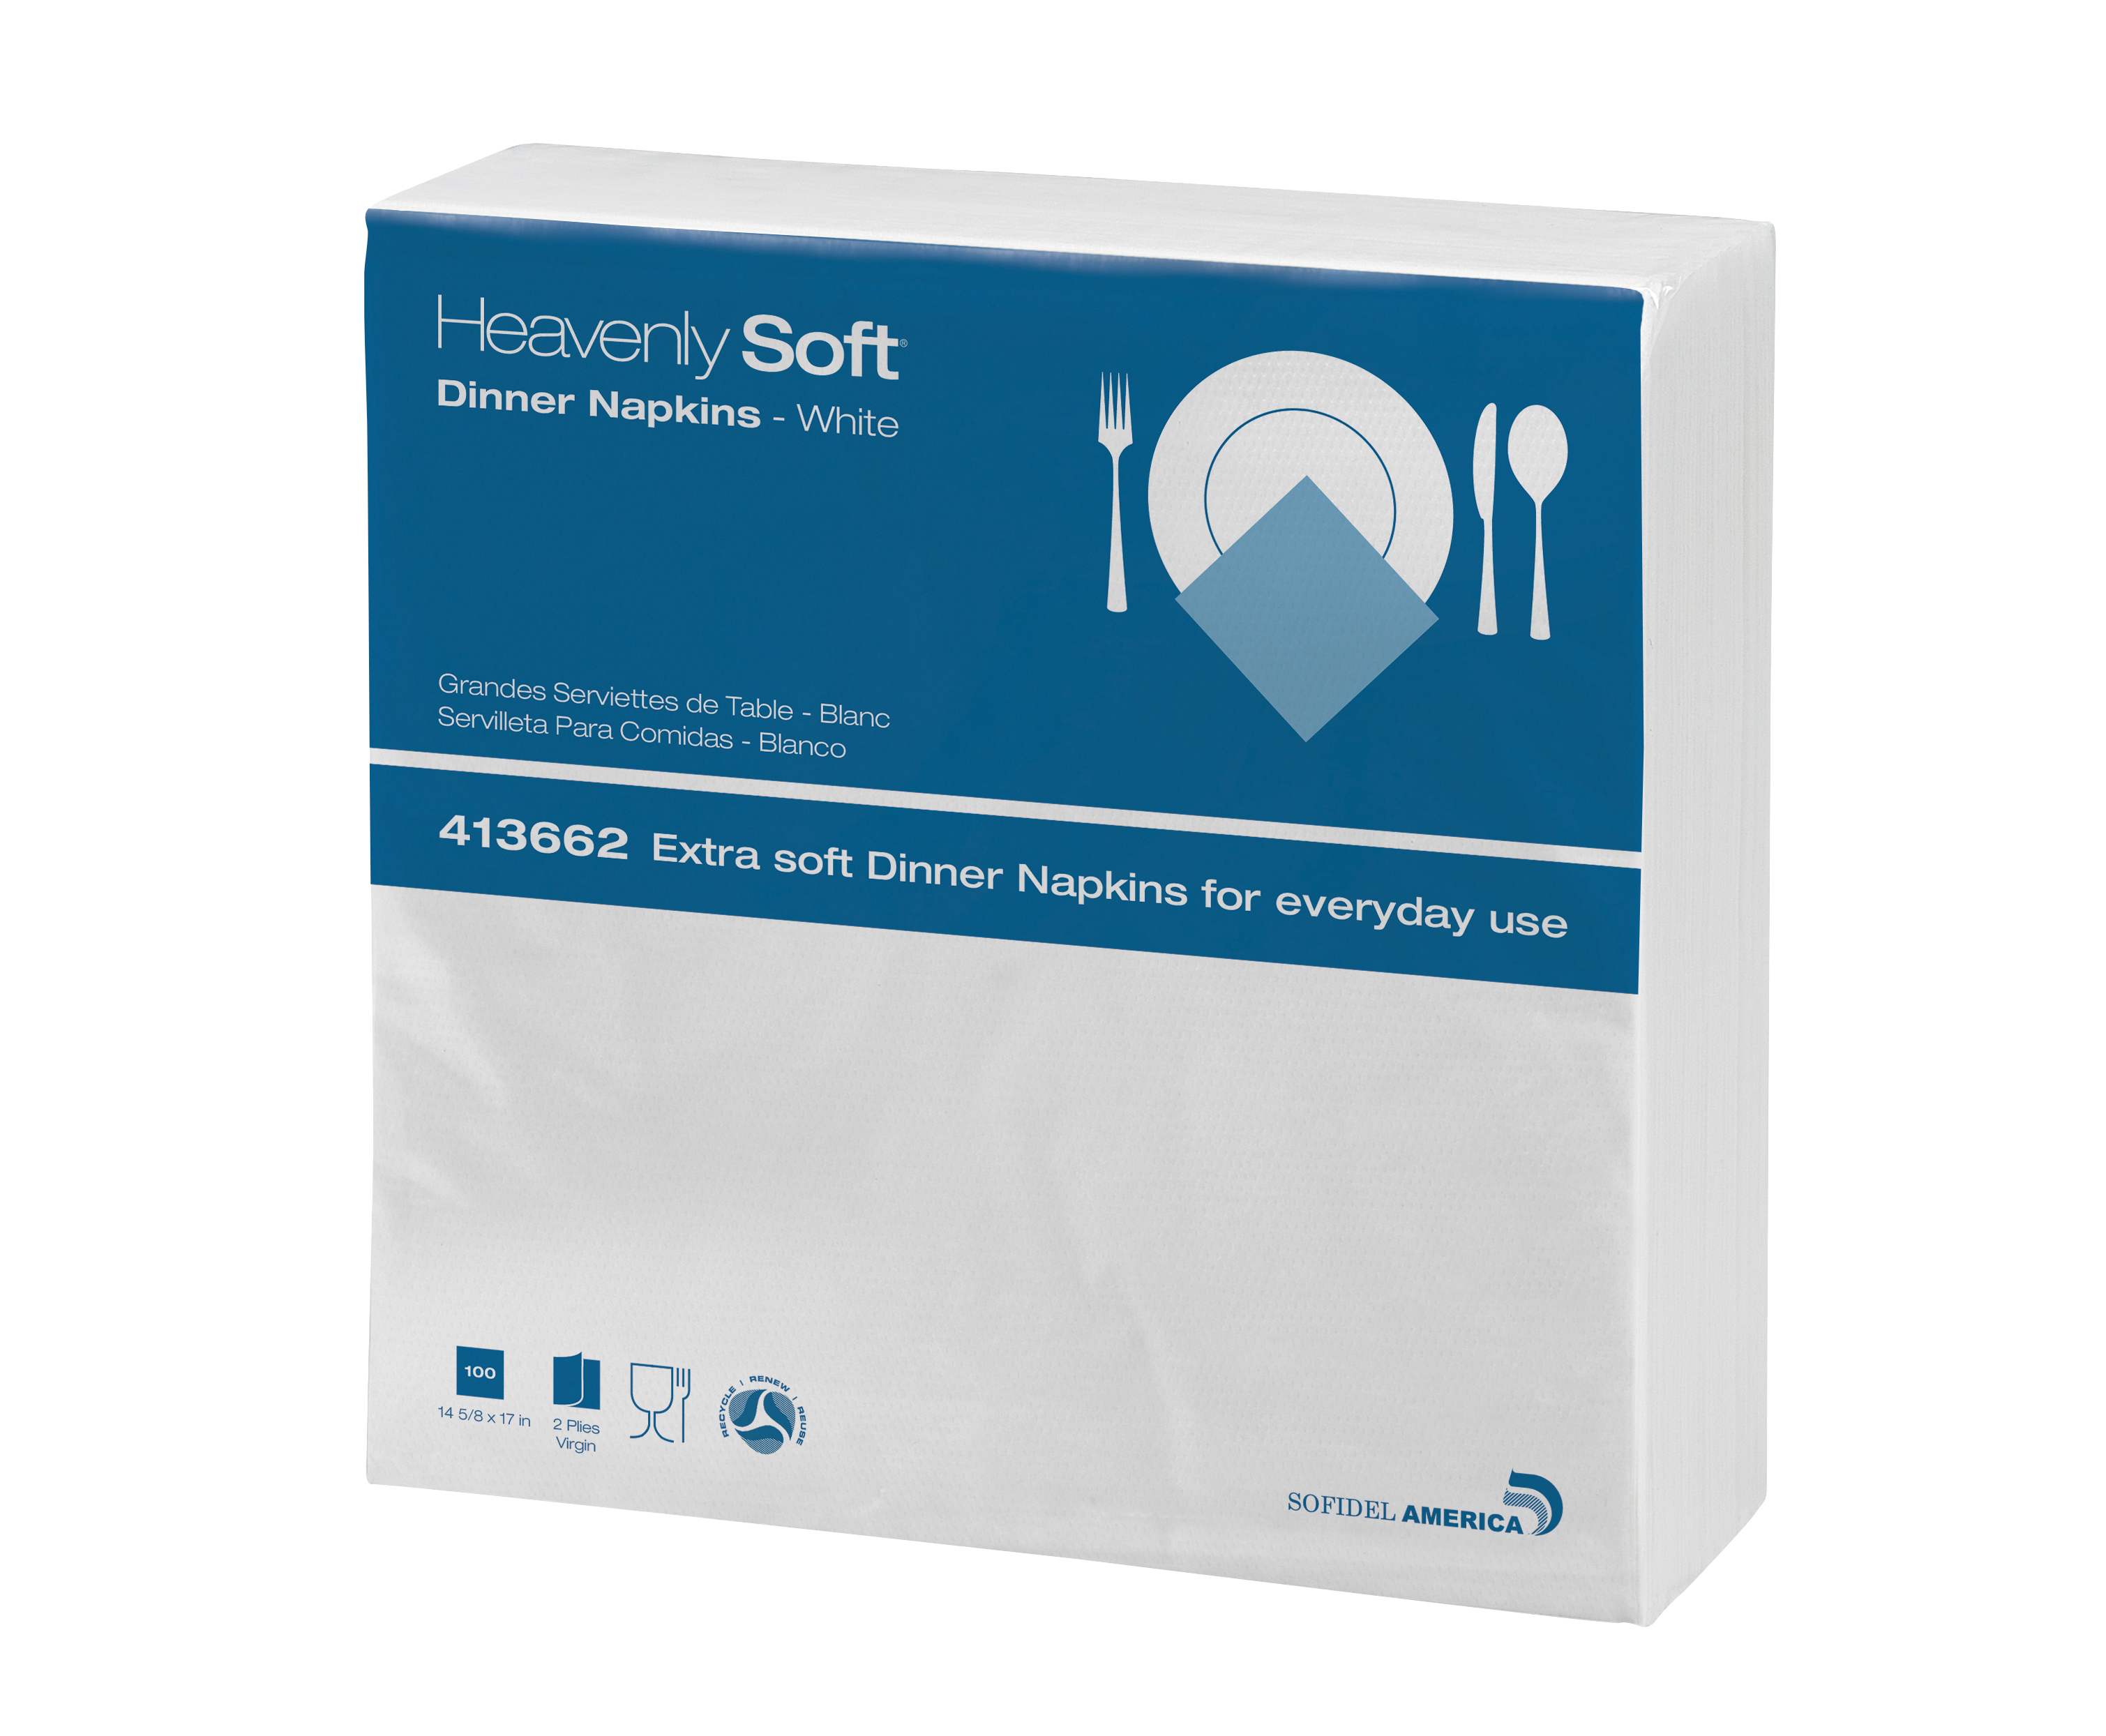 Heavenly Soft Dinner Napkin
2 ply 14 5/8&quot; x 17&quot;  1/4 fold
3000 ct